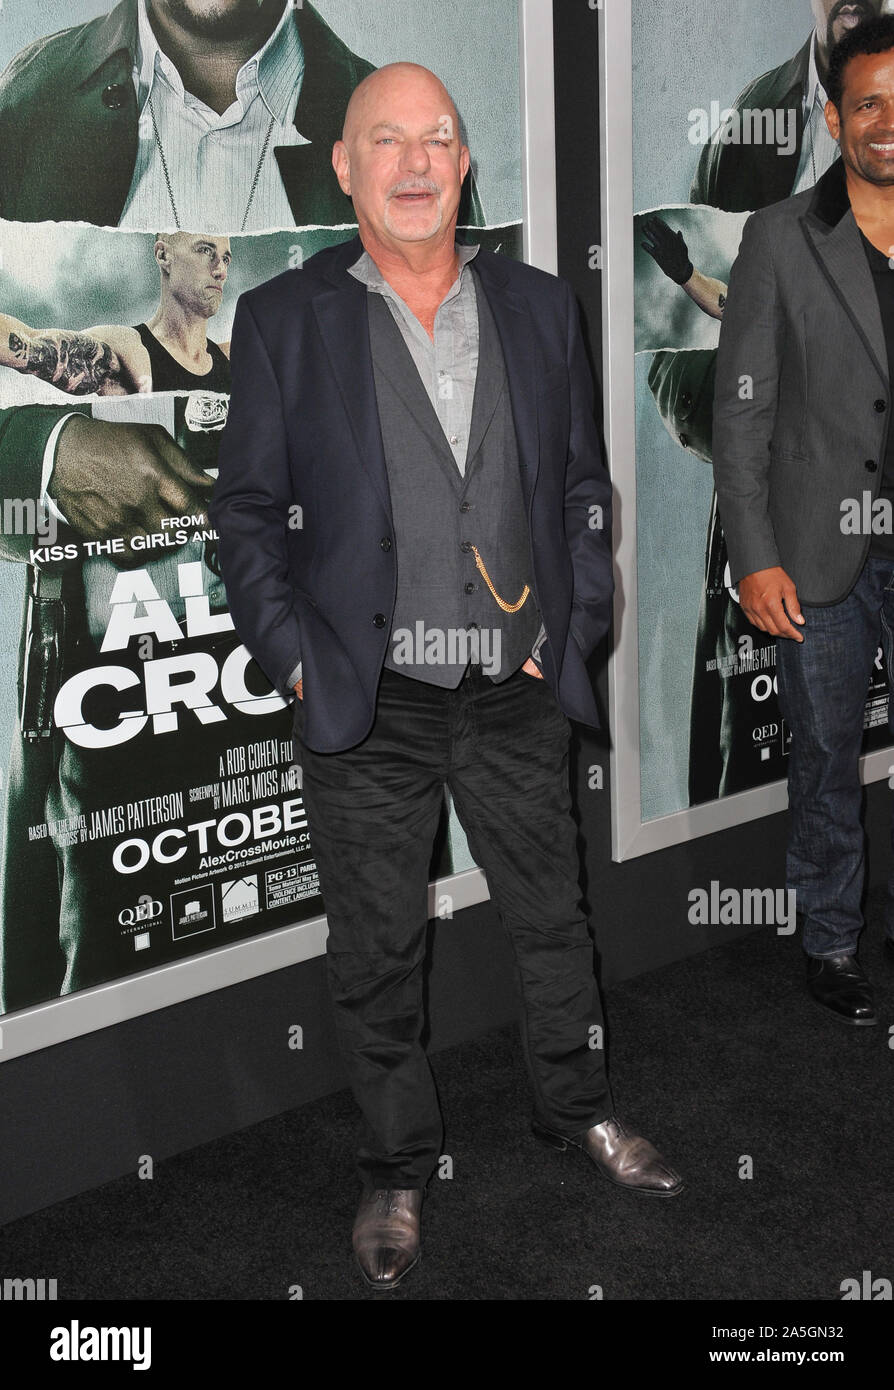 LOS ANGELES, CA. October 15, 2012: Director Rob Cohen at the Los Angeles premiere of his movie "Alex Cross" at the Cinerama Dome, Hollywood. © 2012 Paul Smith / Featureflash Stock Photo